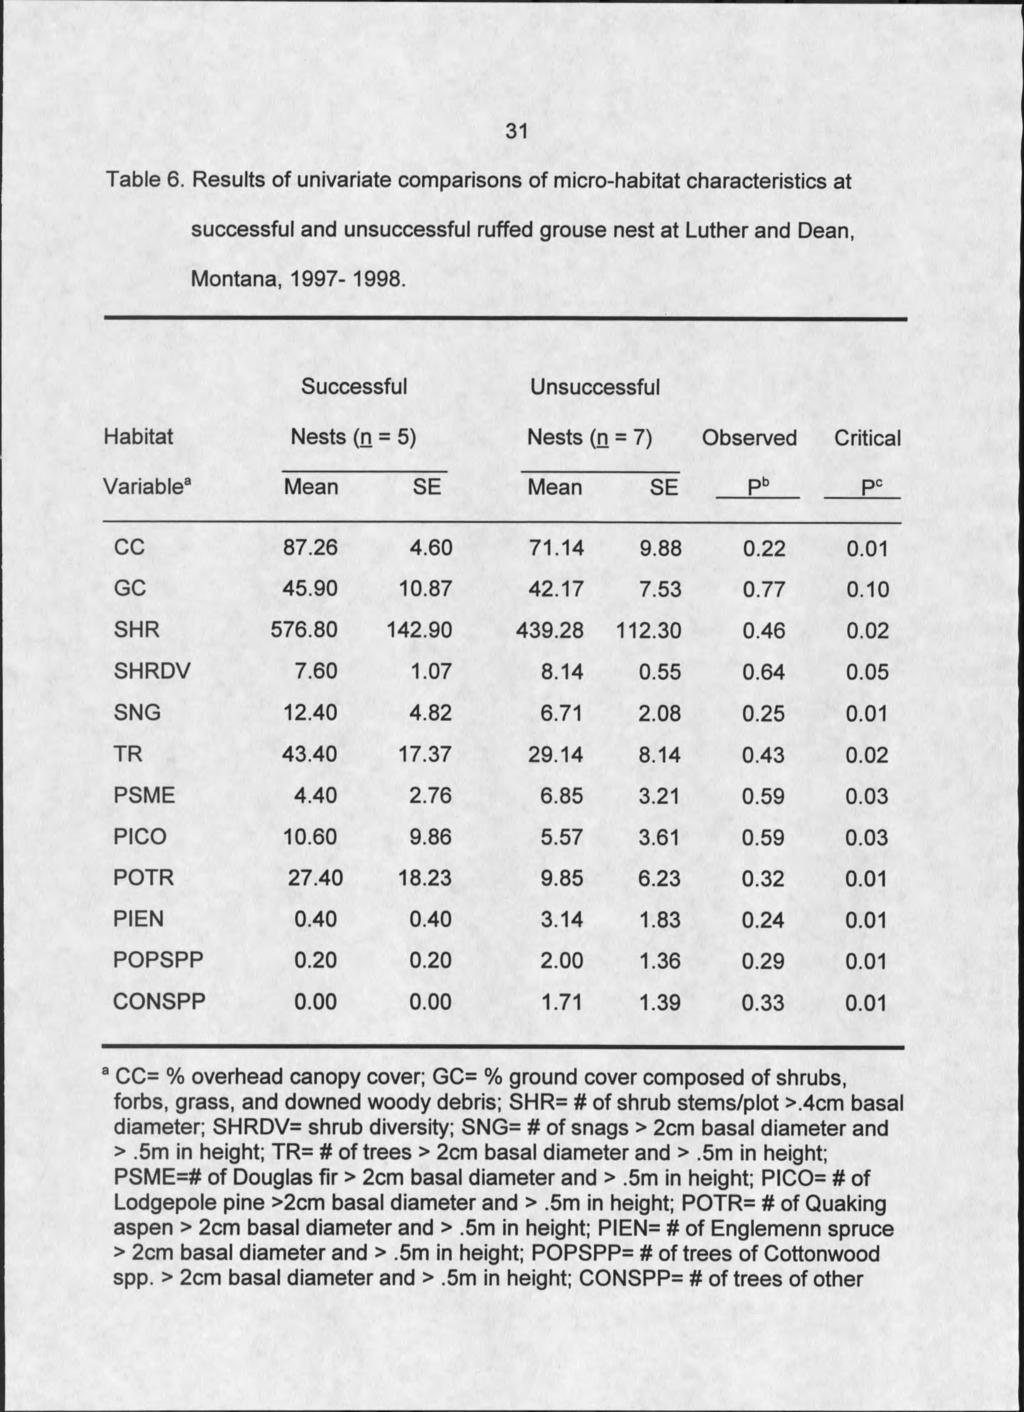 31 Table 6. Results of univariate comparisons of micro-habitat characteristics at successful and unsuccessful ruffed grouse nest at Luther and Dean, Montana, 1997-1998.